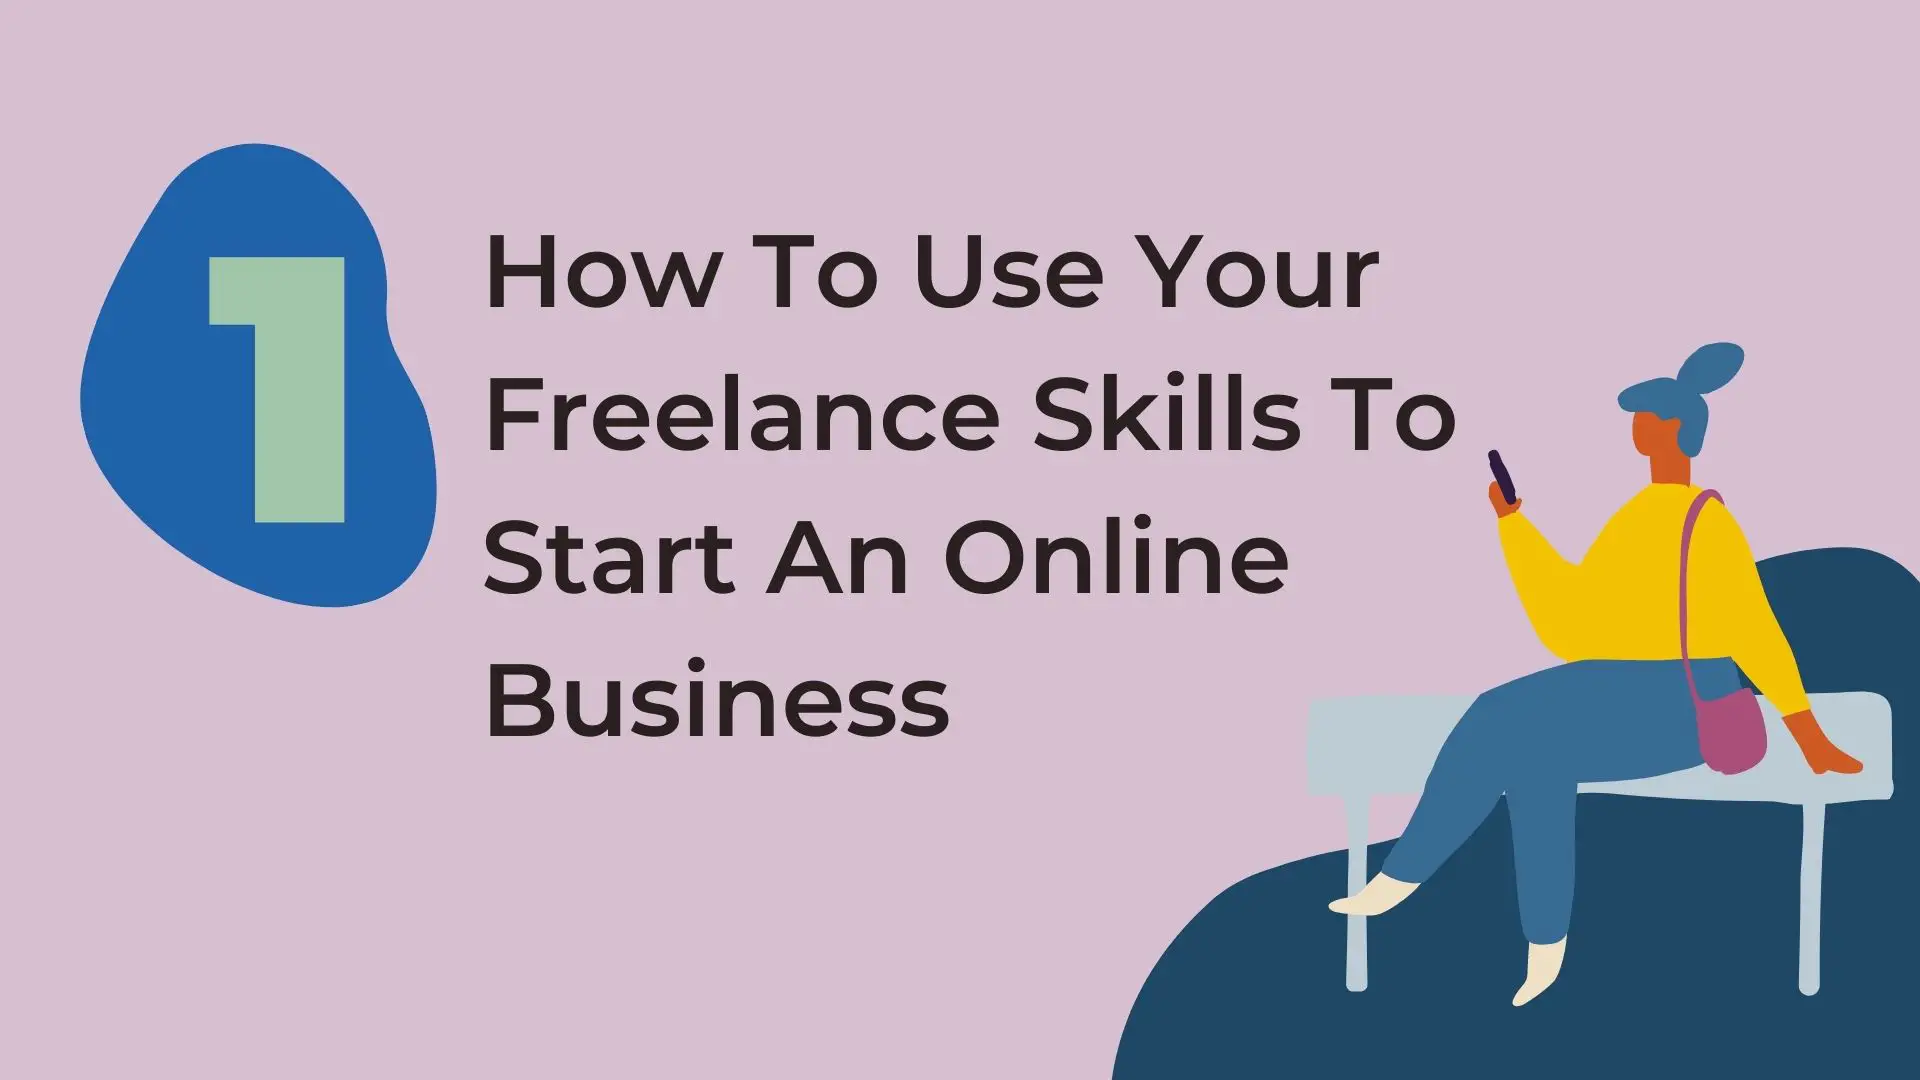 How To Use Your Freelance Skills To Start An Online Business